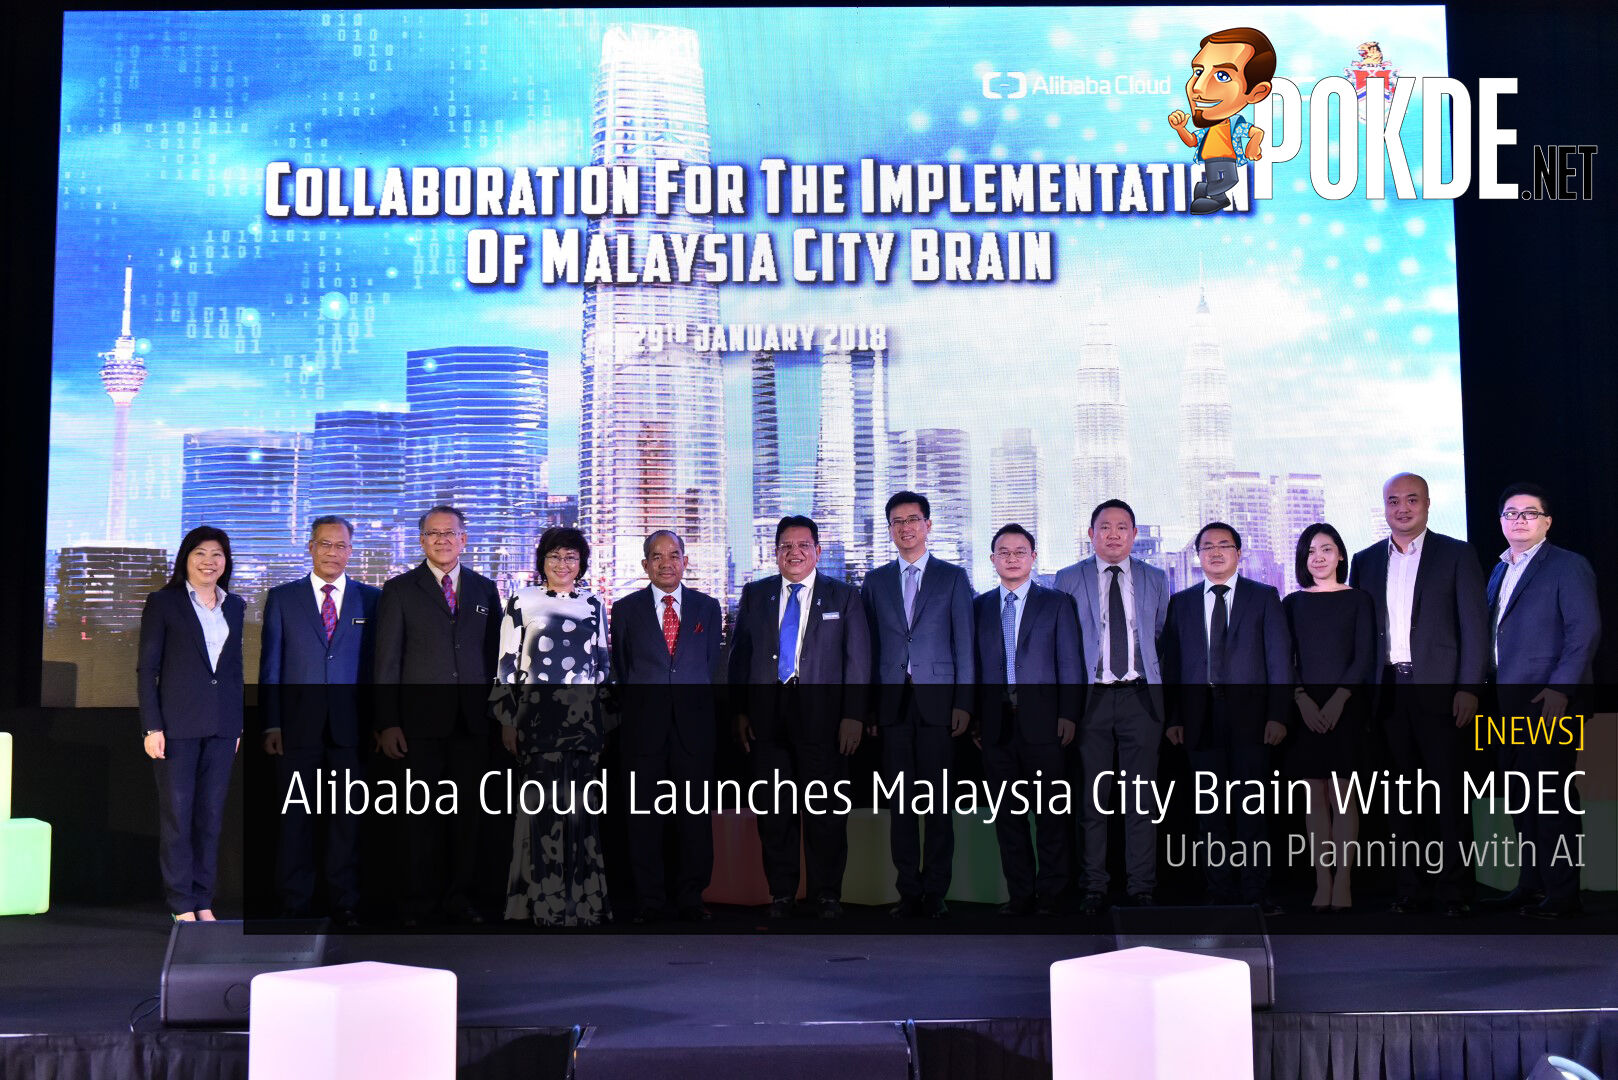 Alibaba Cloud Launches Malaysia City Brain With MDEC - Urban Planning with AI 20